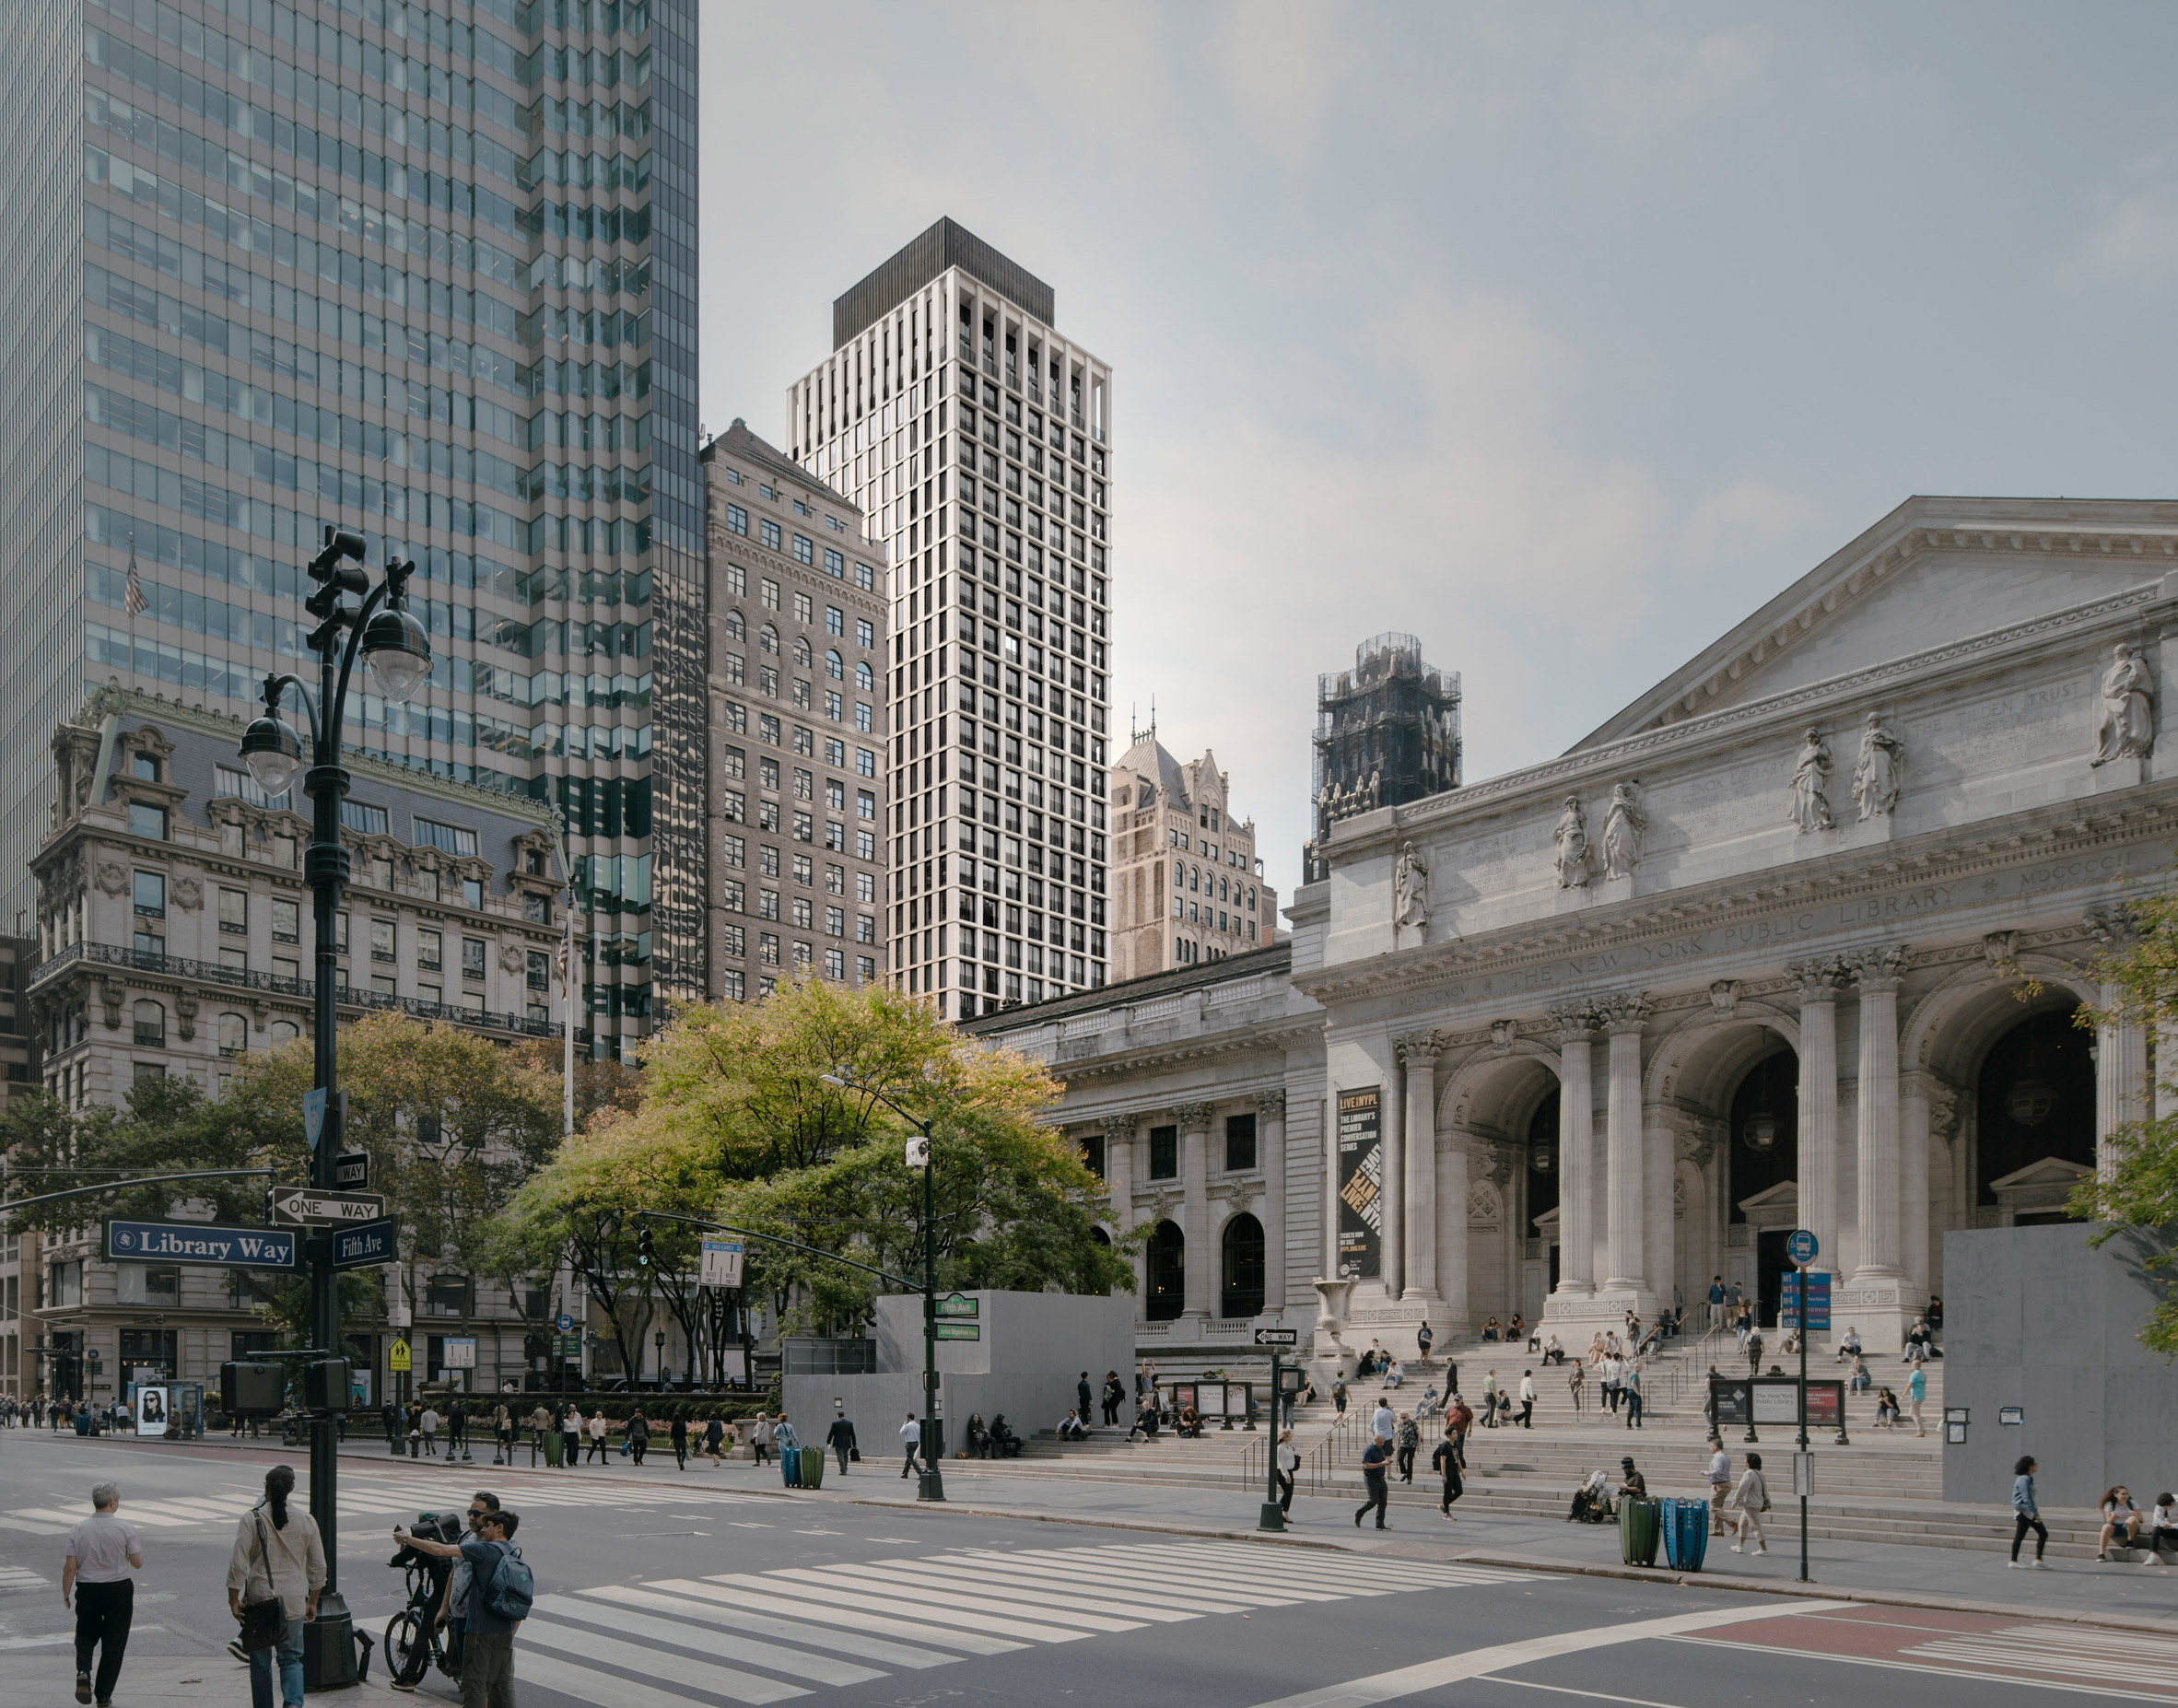 The Bryant visible behind the New York Public Library.